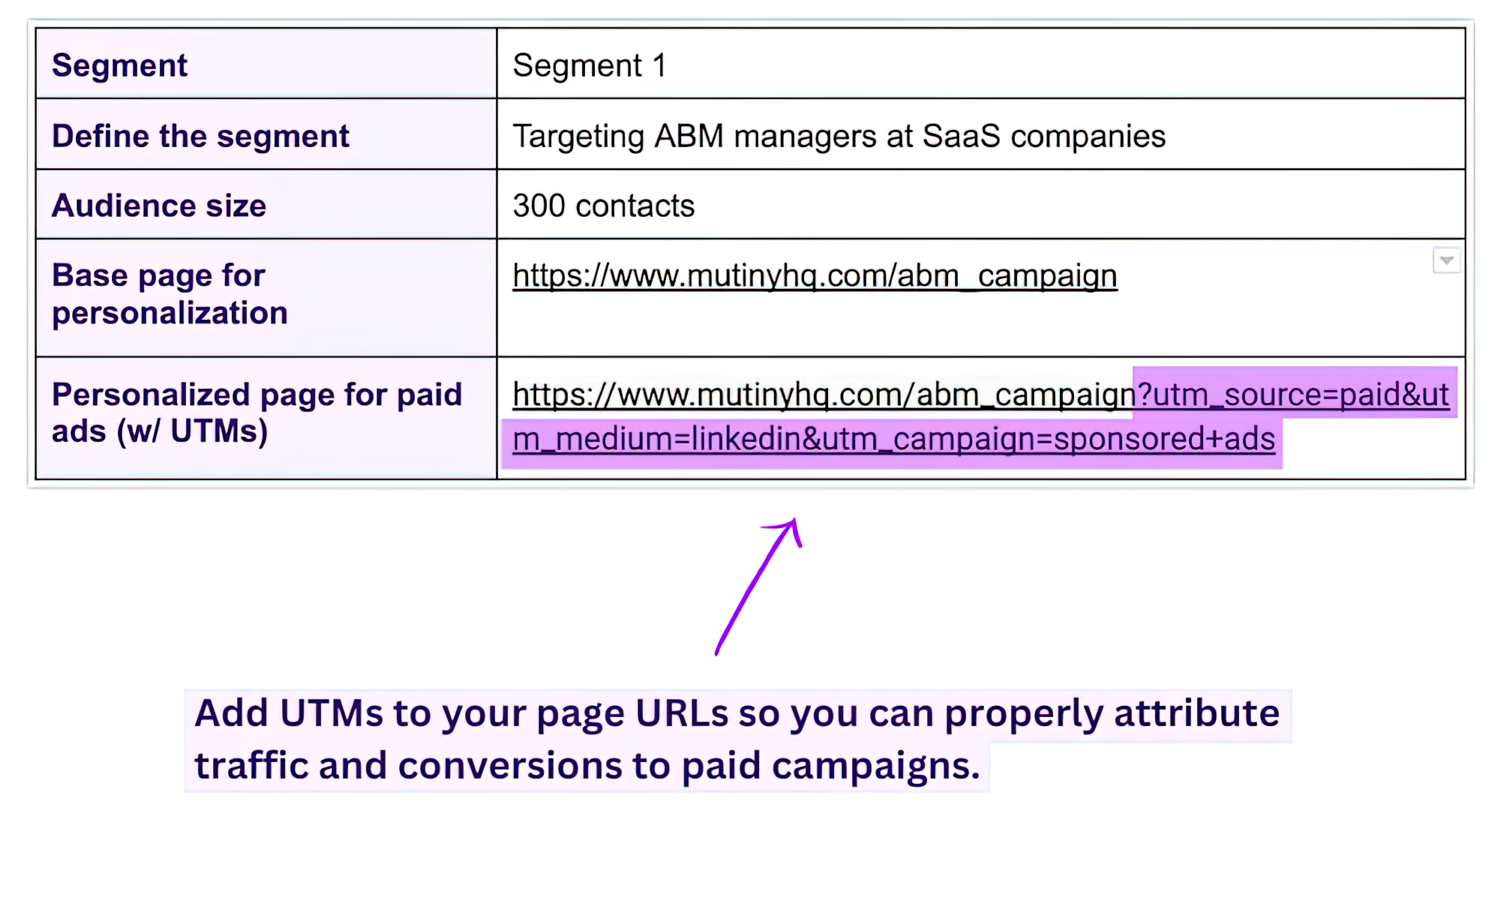 Add UTMs to your page URLs